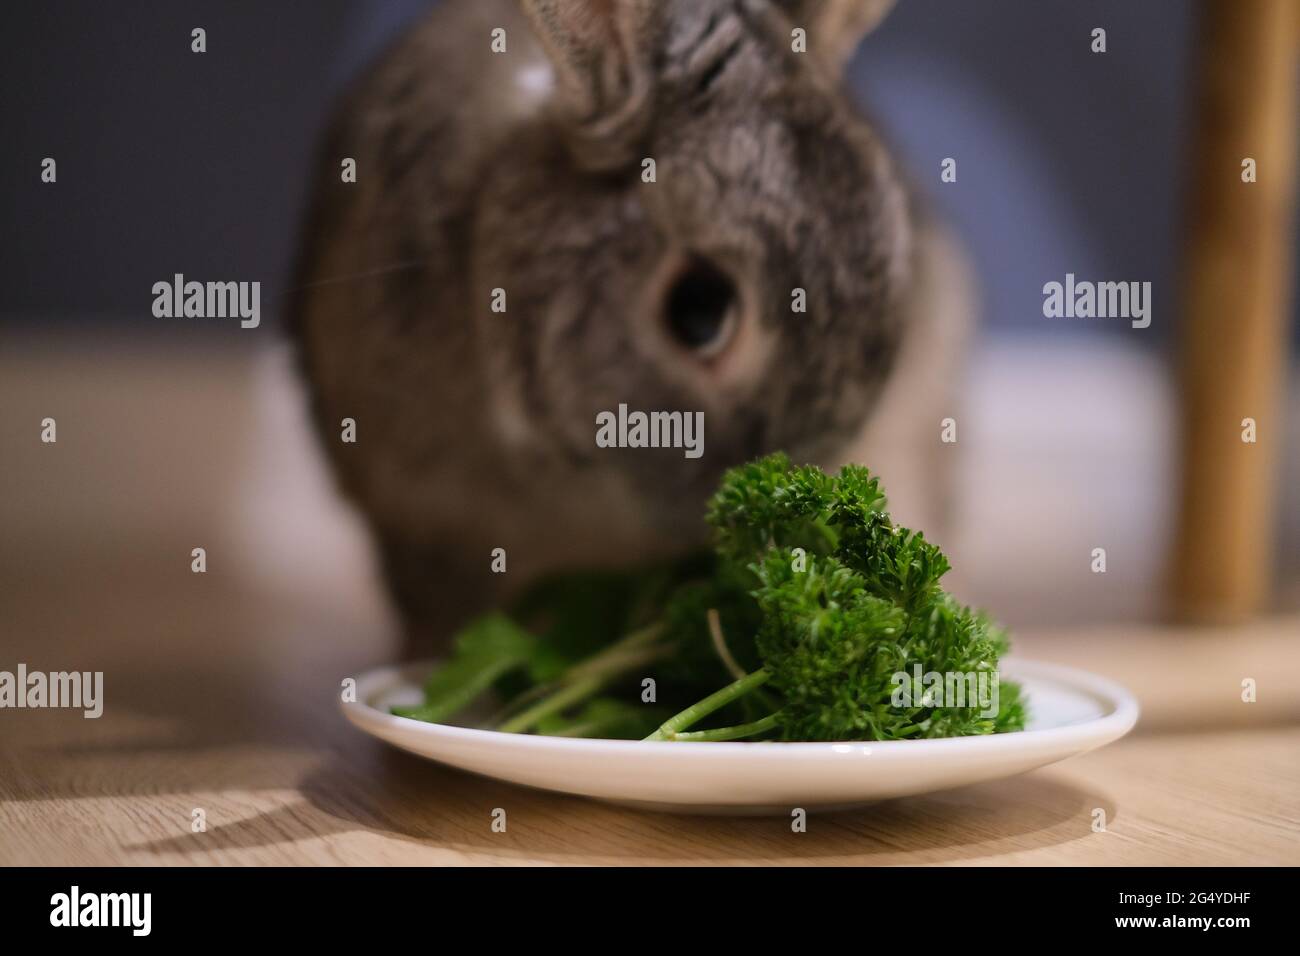 A plate of fresh vegetables has been inspected by a shy rabbit Stock Photo